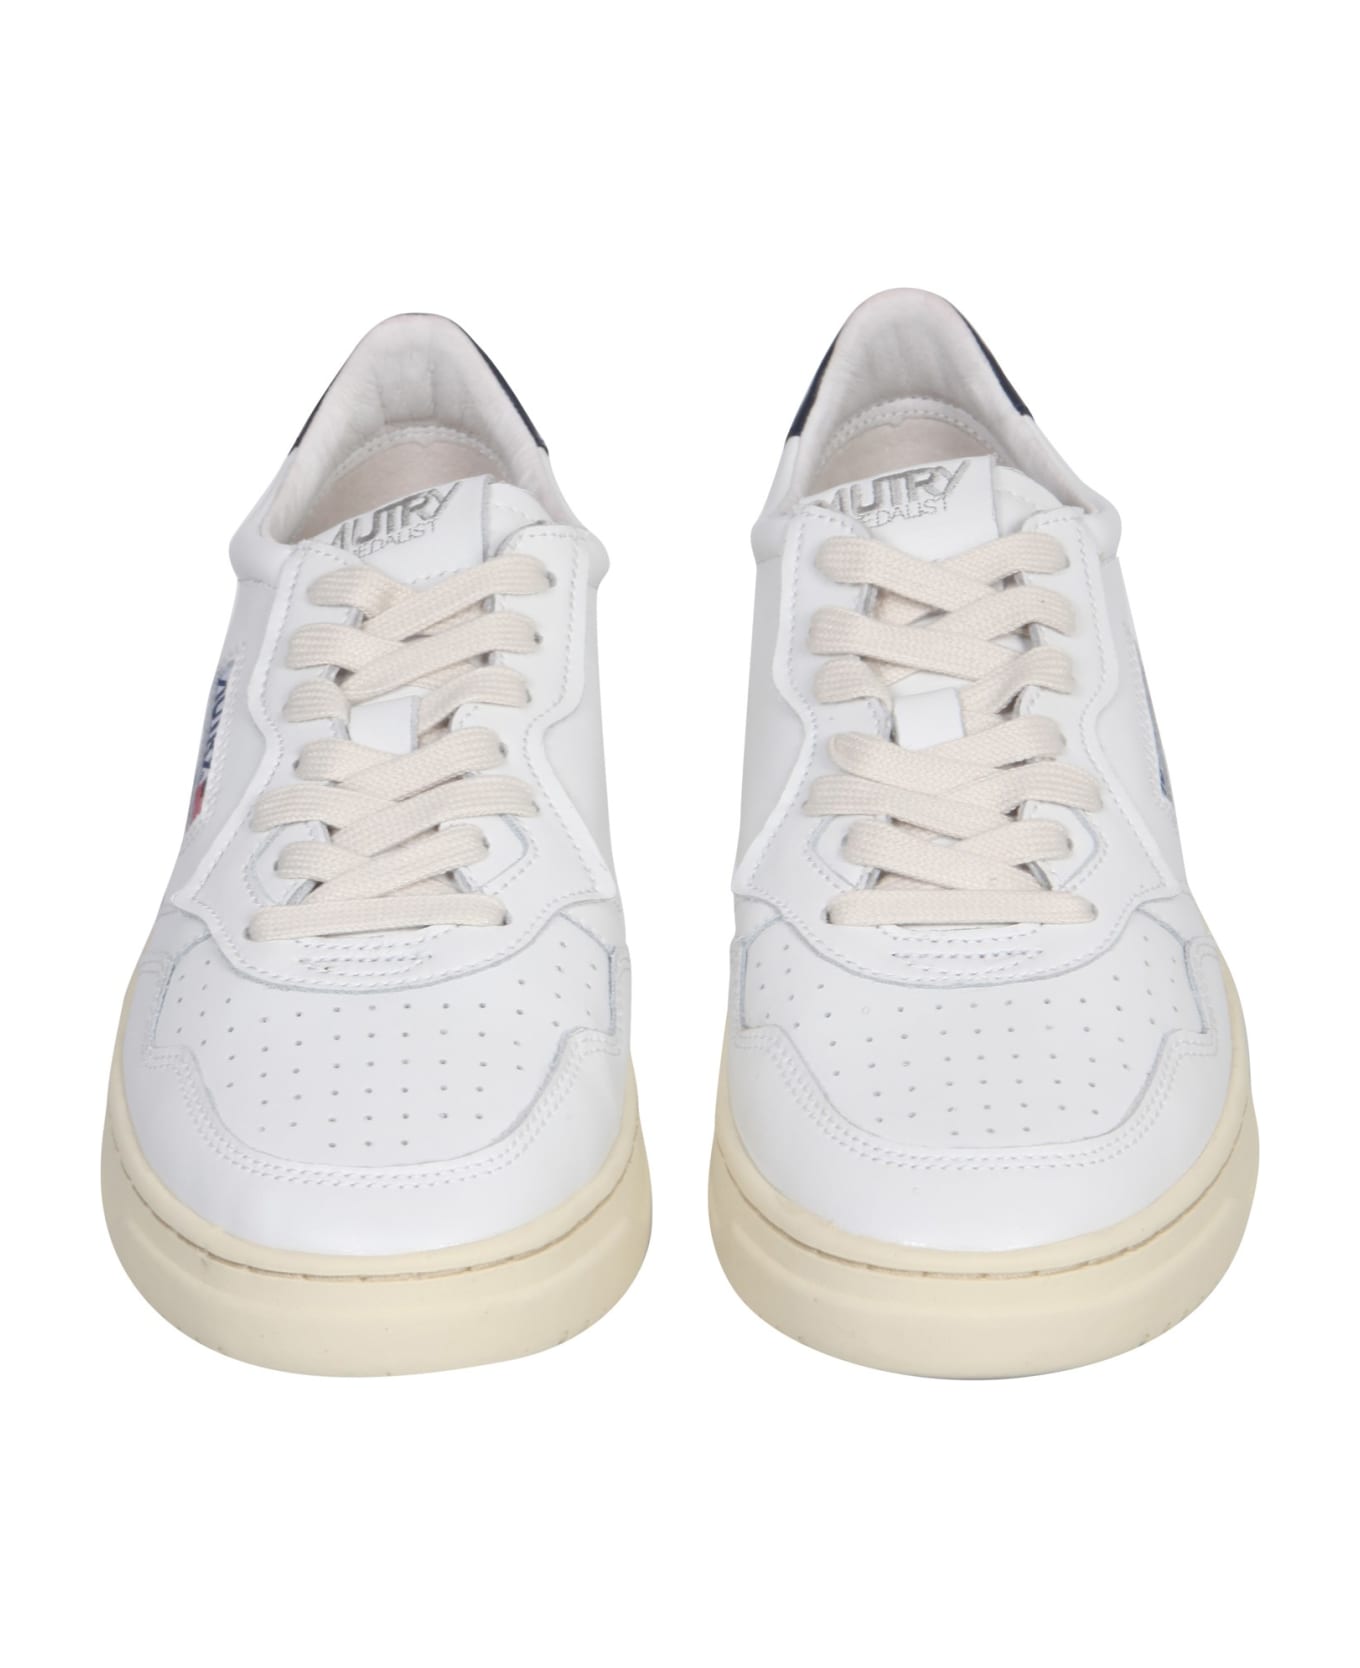 Autry Leather Sneakers - BIANCO